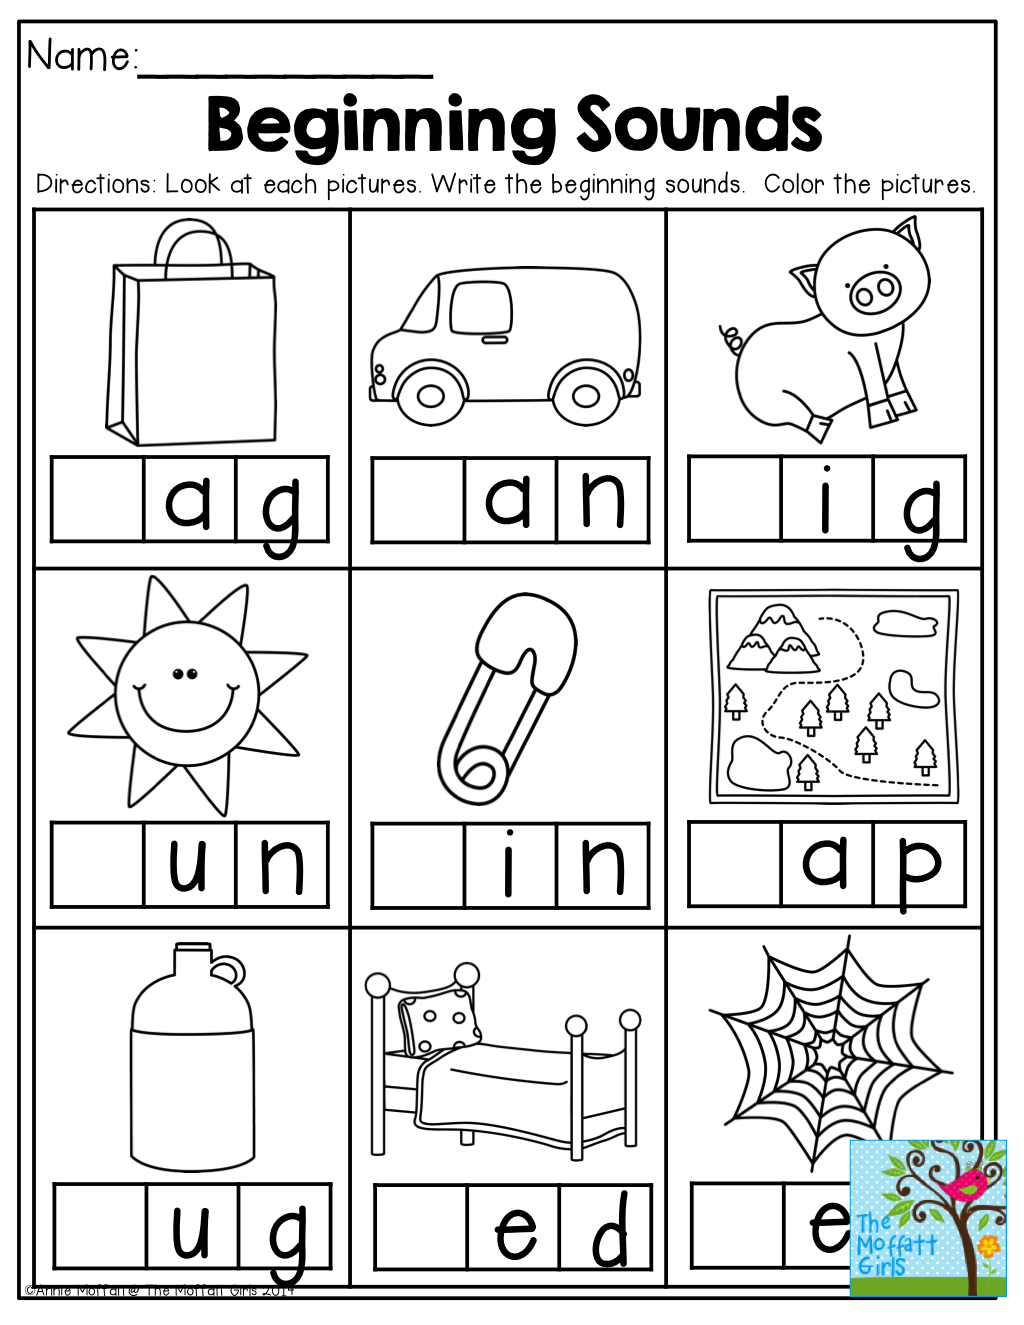 BEGINNING SOUNDS And So Many Other Great Printables For 